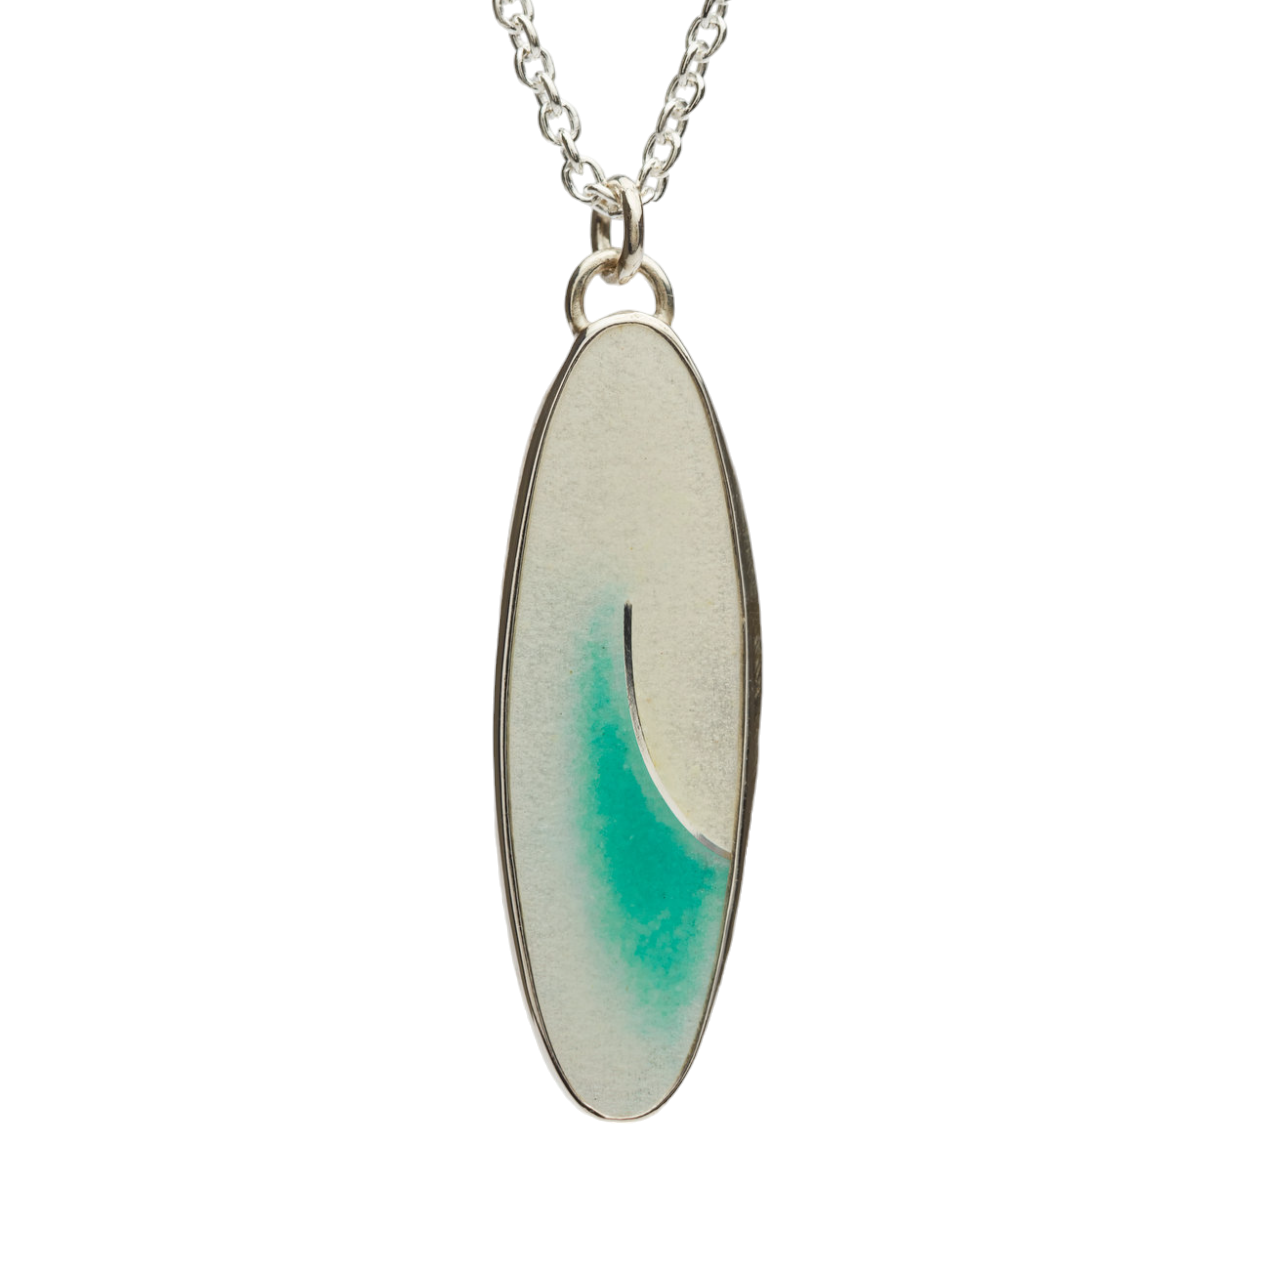 RESONATE, pendant in silver and enamel